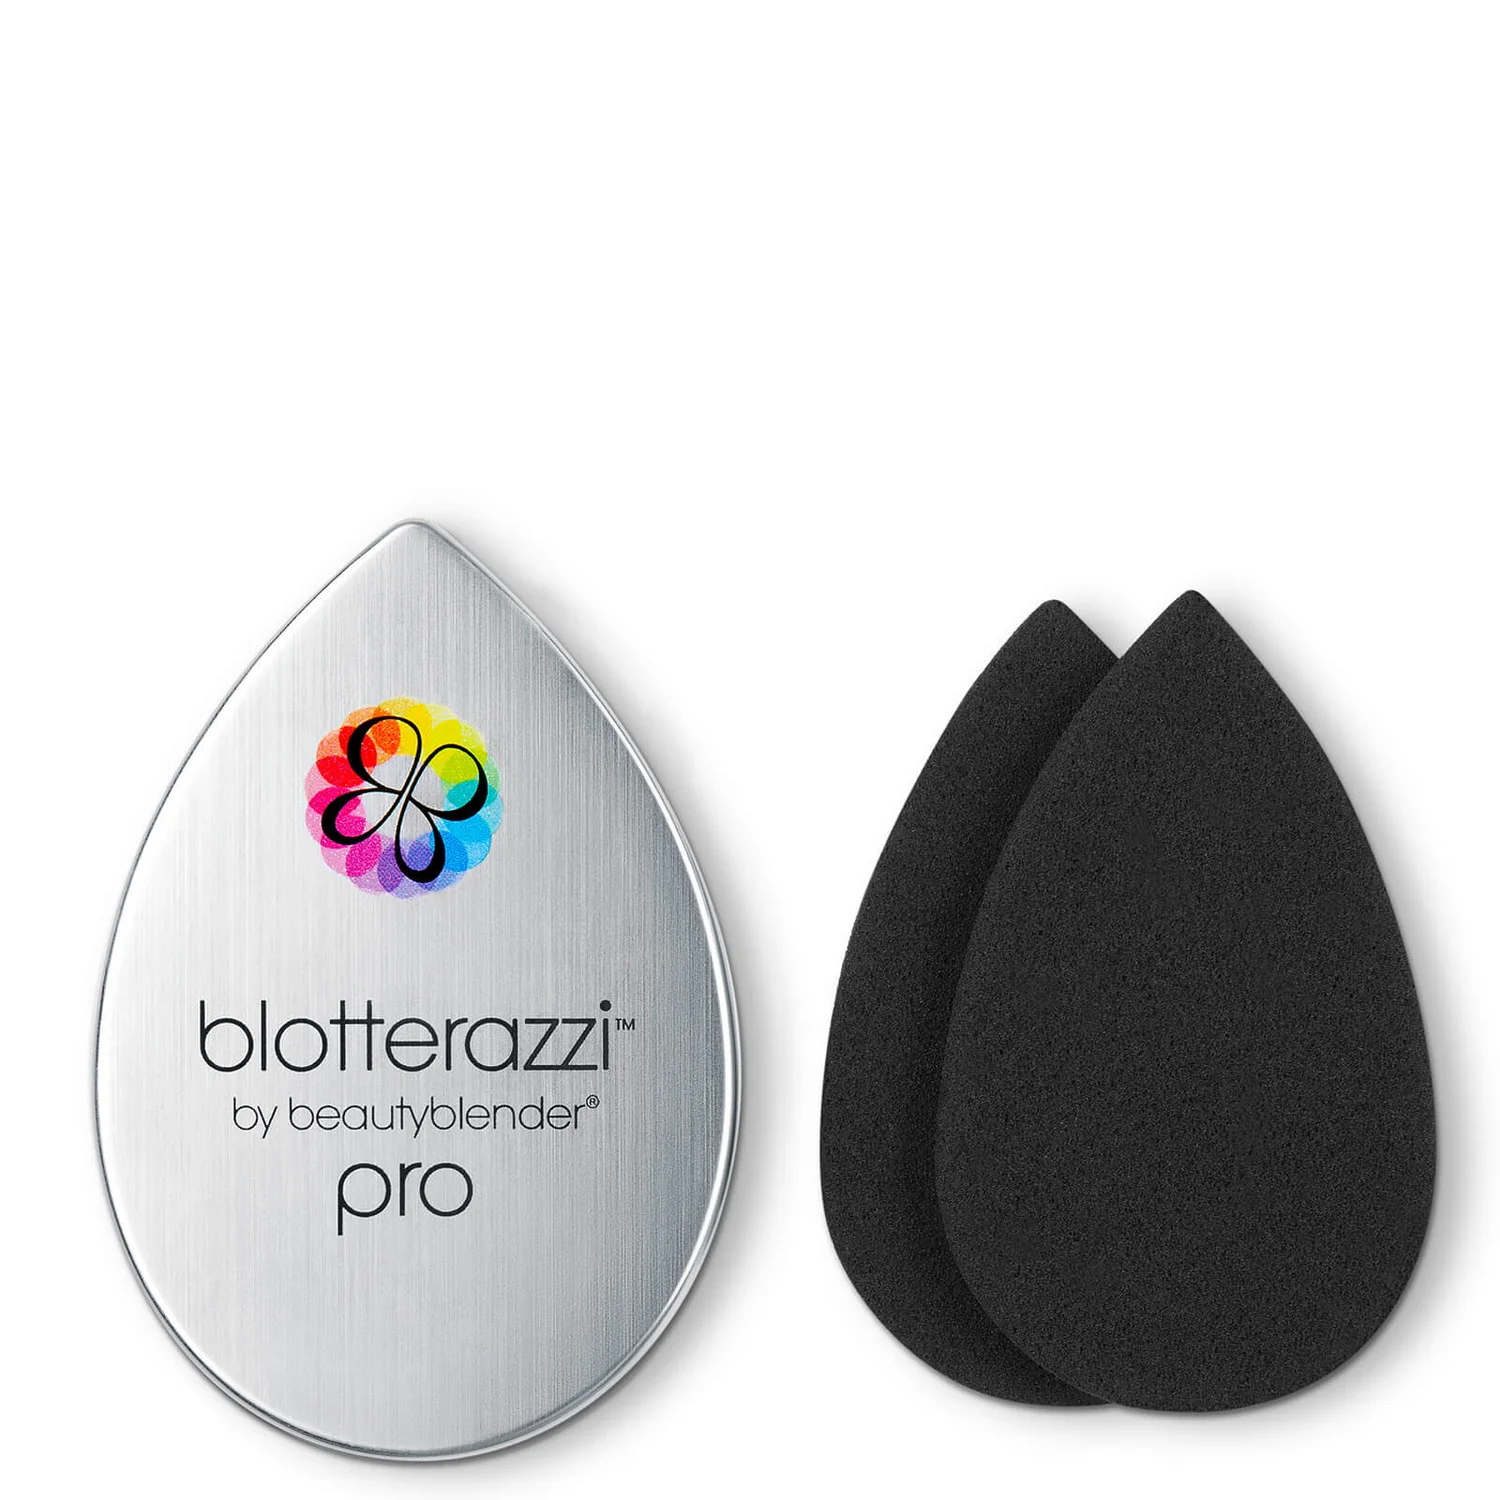 A teardrop-shaped silver container on the left. On the cover, it says: blotterazzi™ by Beautyblender pro. On the right are two teardrop-shaped black beauty blenders
